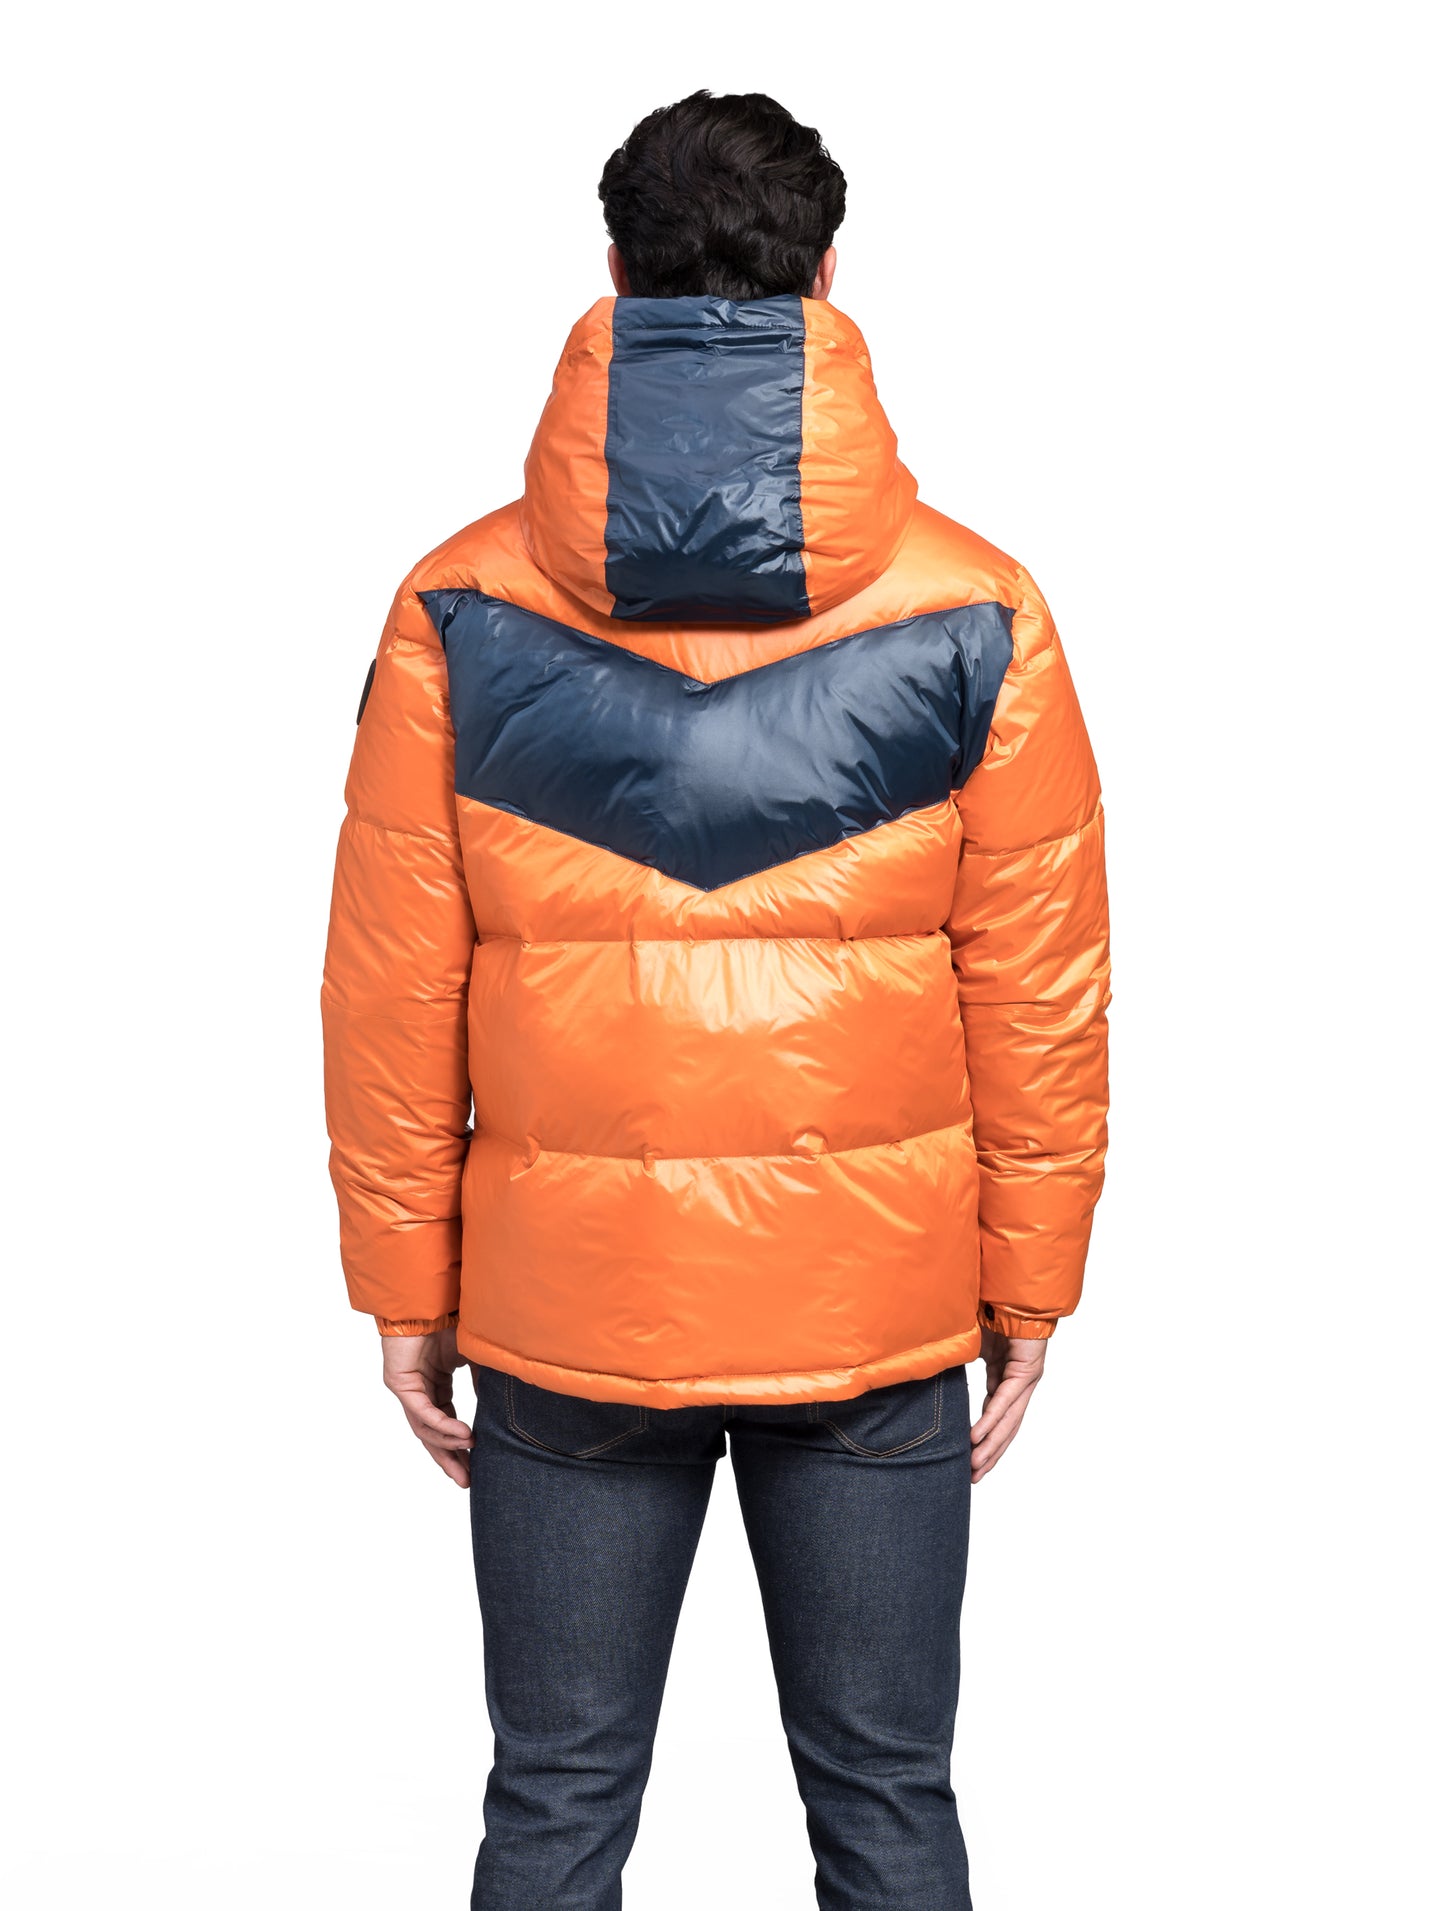 Dyna Men's Chevron Quilted Puffer Jacket in hip length, premium cire technical nylon taffeta fabrication, Premium Canadian origin White Duck Down insulation, non-removable down-filled hood, two-way centre-front zipper, fleece-lined zipper pockets at waist, pit zipper vents, in Burnt Orange